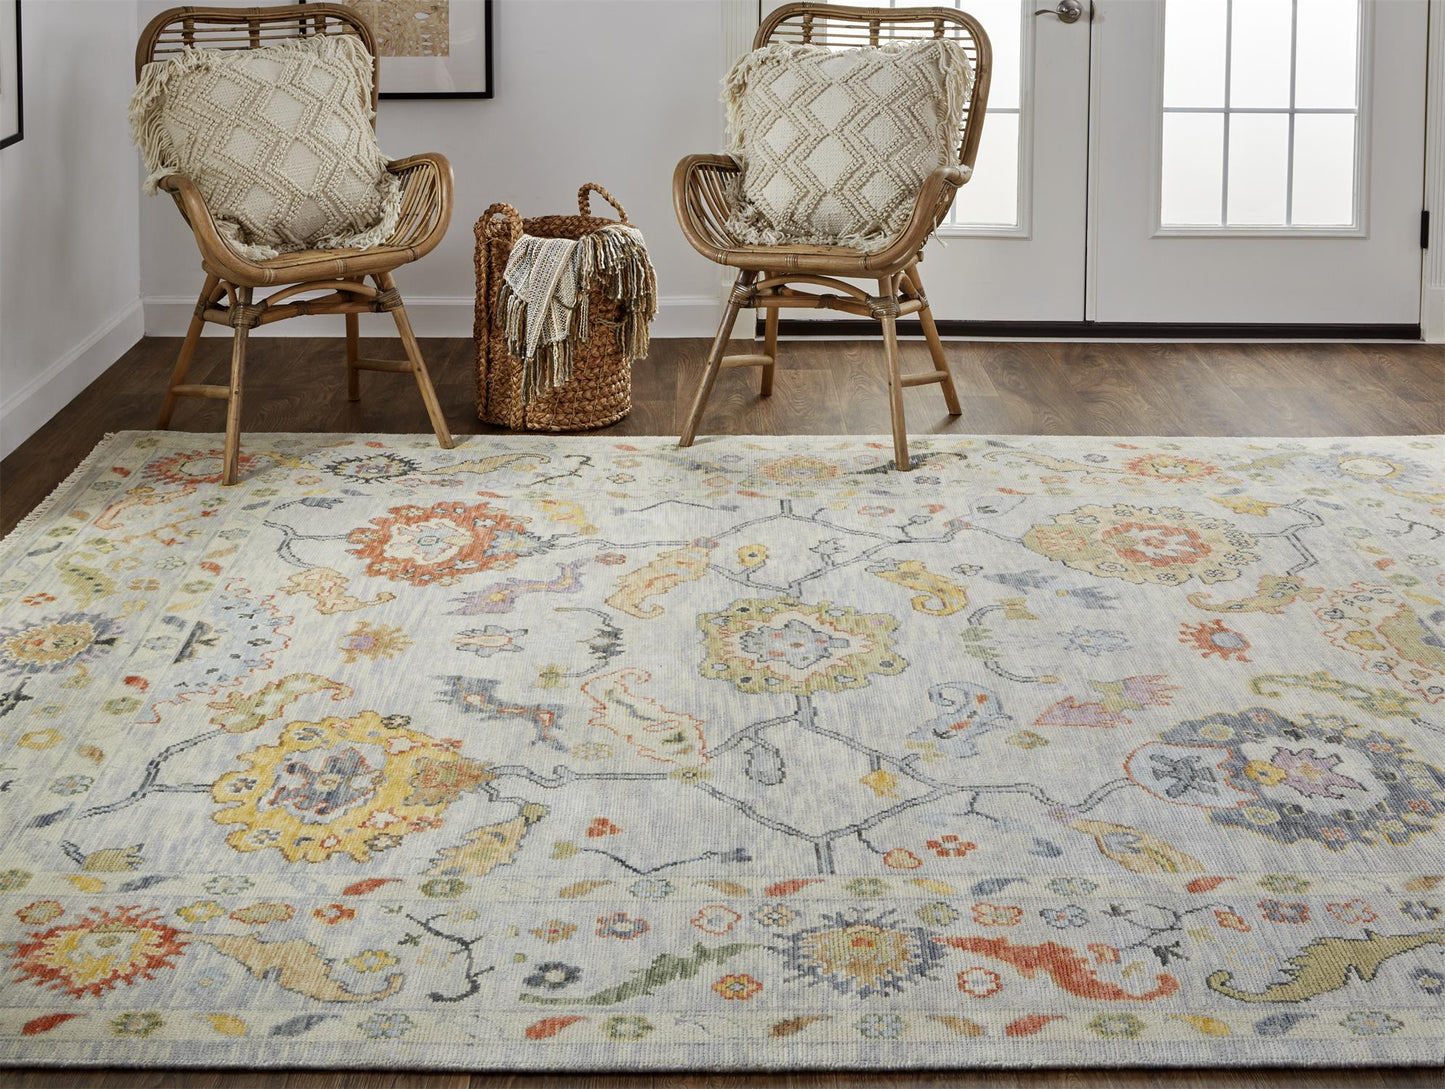 Karina 6793F Hand Knotted Wool Indoor Area Rug by Feizy Rugs